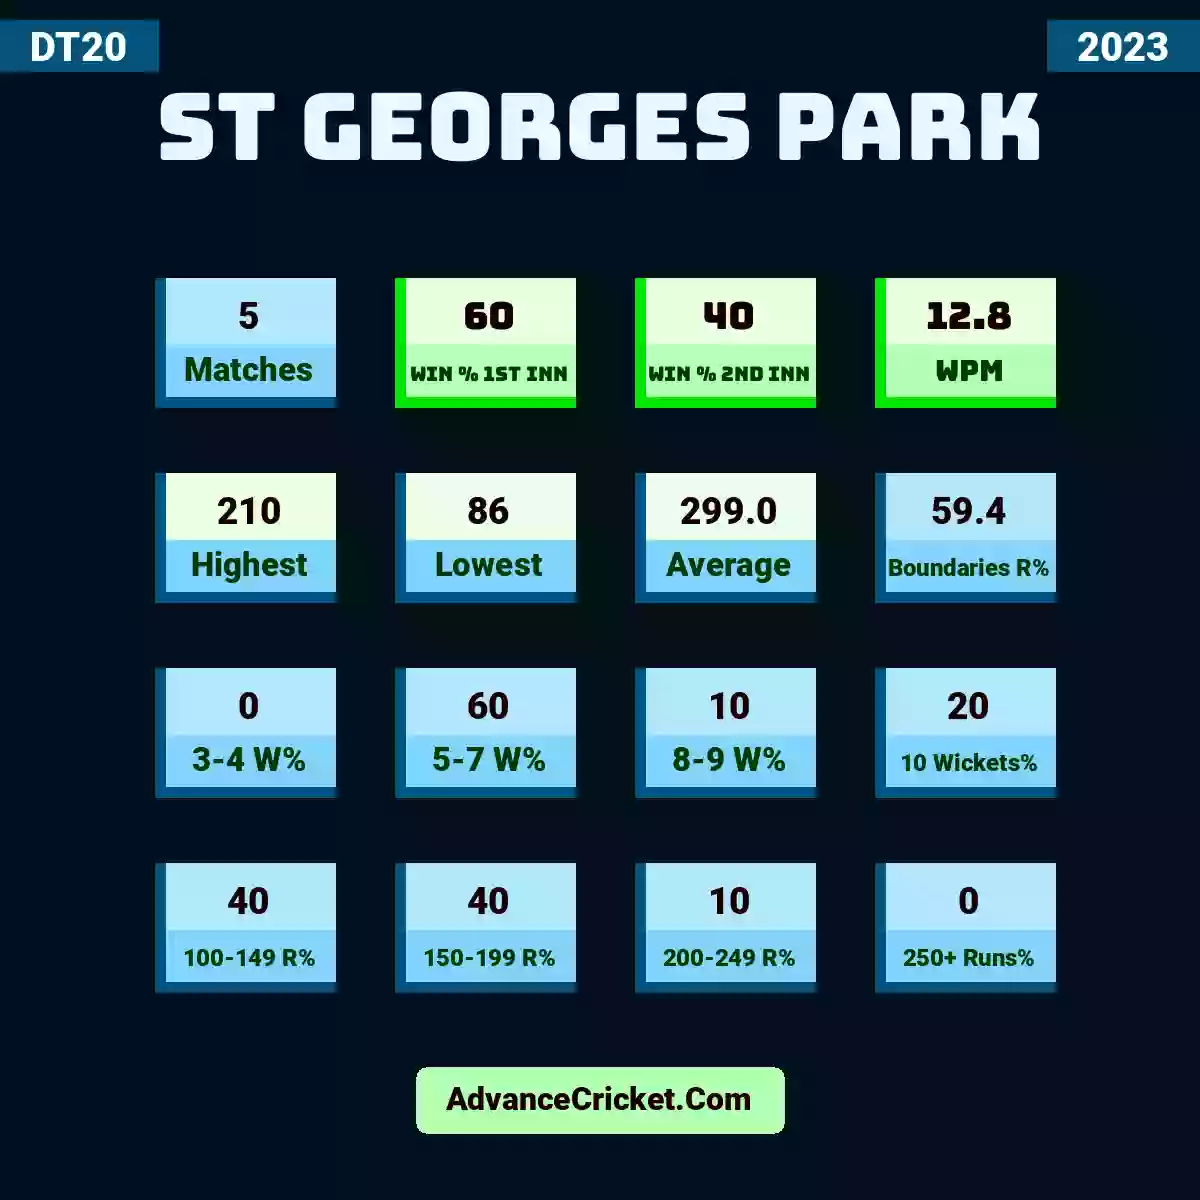 Image showing St Georges Park with Matches: 5, Win % 1st Inn: 60, Win % 2nd Inn: 40, WPM: 12.8, Highest: 210, Lowest: 86, Average: 299.0, Boundaries R%: 59.4, 3-4 W%: 0, 5-7 W%: 60, 8-9 W%: 10, 10 Wickets%: 20, 100-149 R%: 40, 150-199 R%: 40, 200-249 R%: 10, 250+ Runs%: 0.